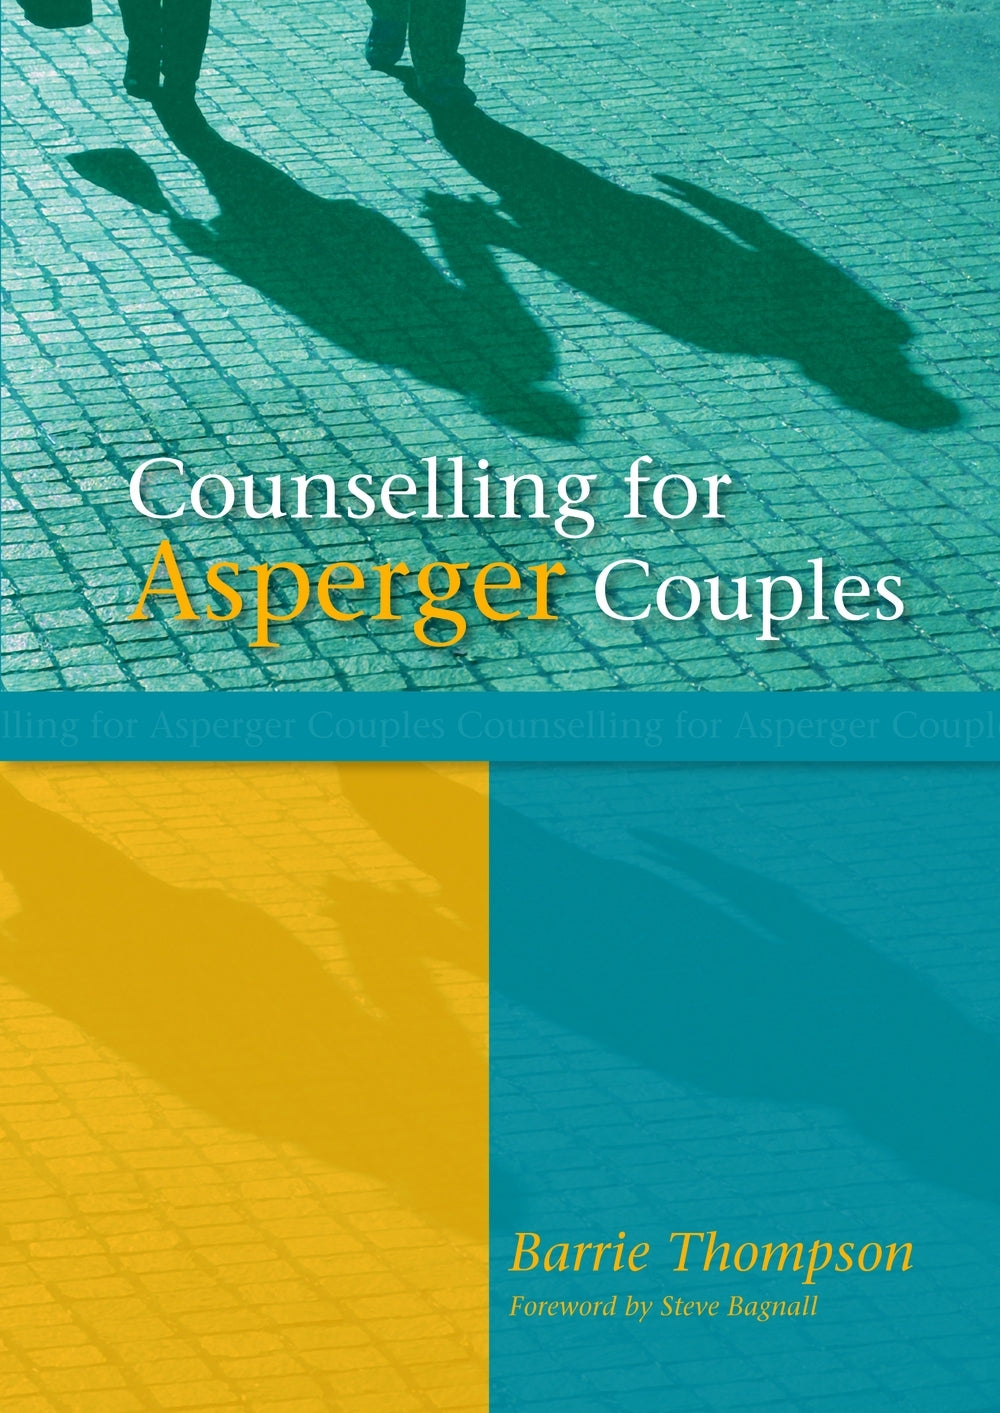 Counselling for Asperger Couples by Steve Bagnall, Barrie Thompson